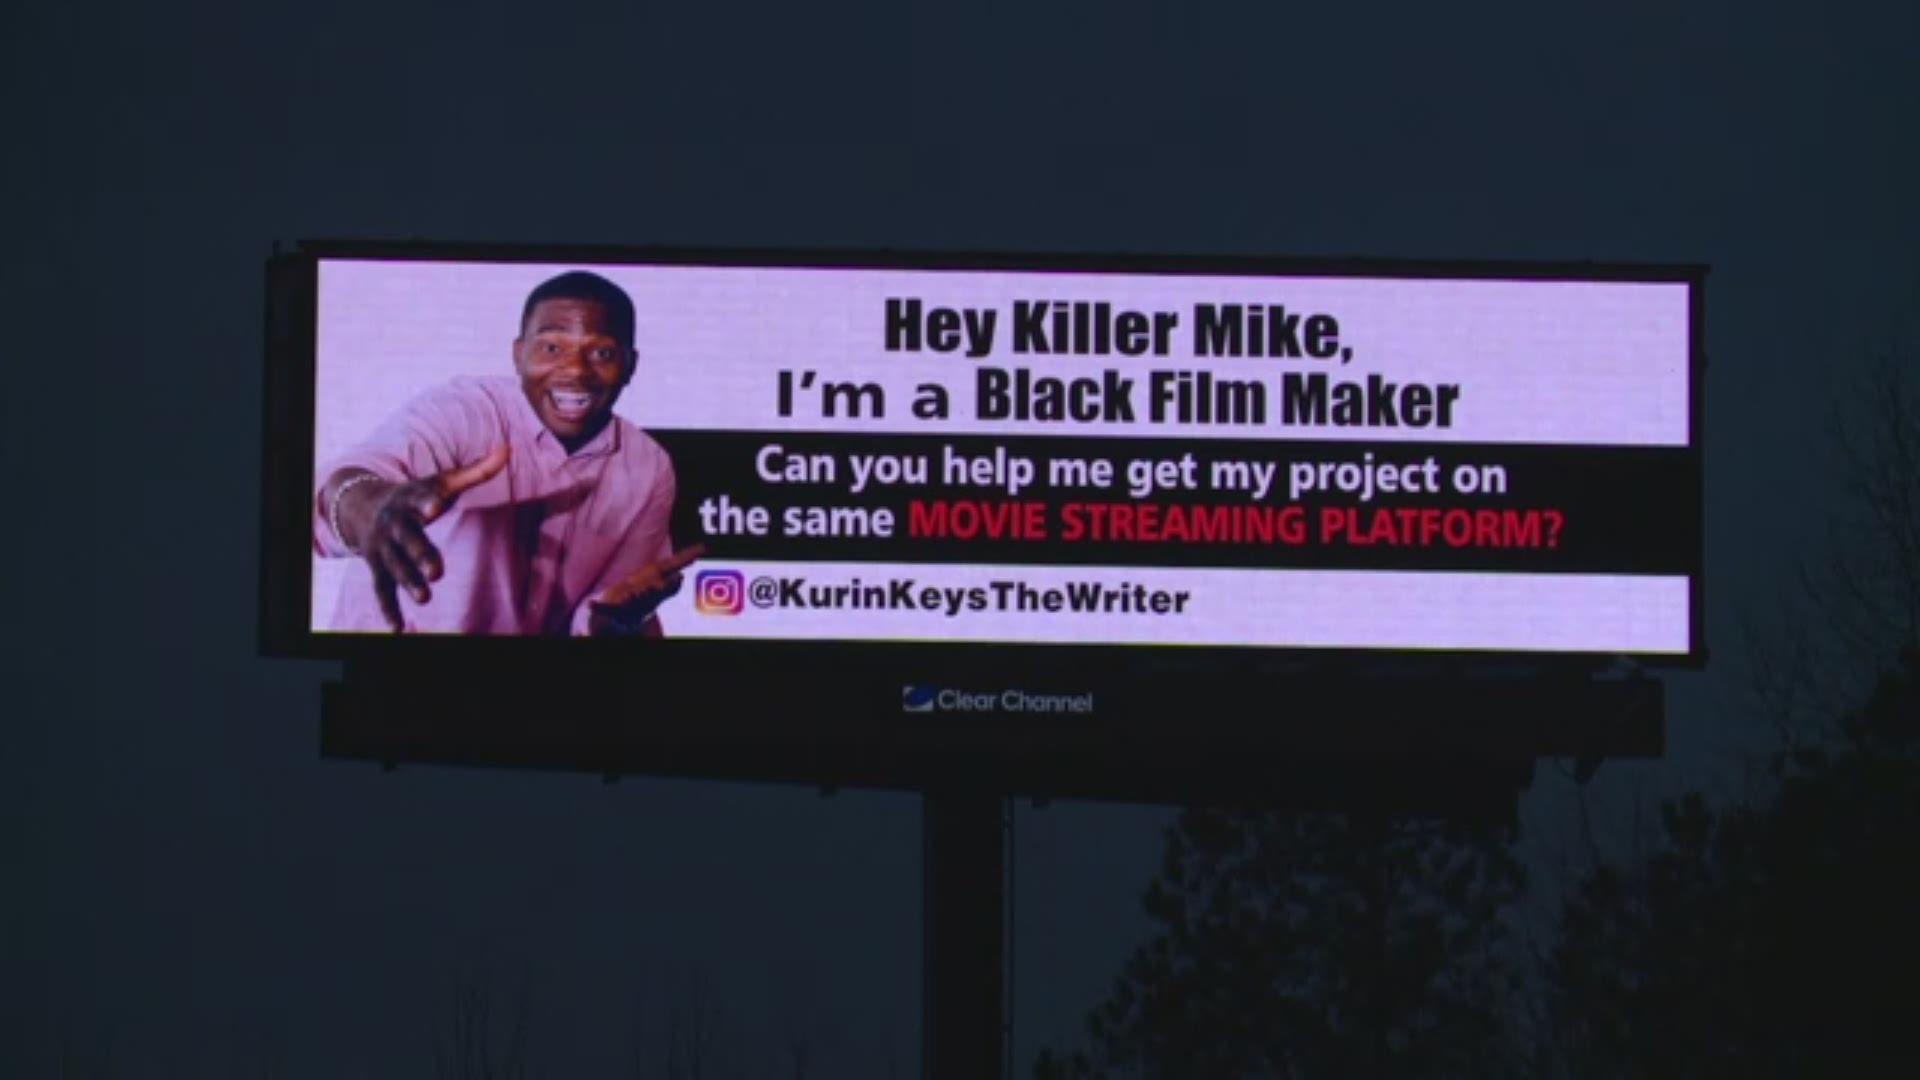 The billboard is located on I-85